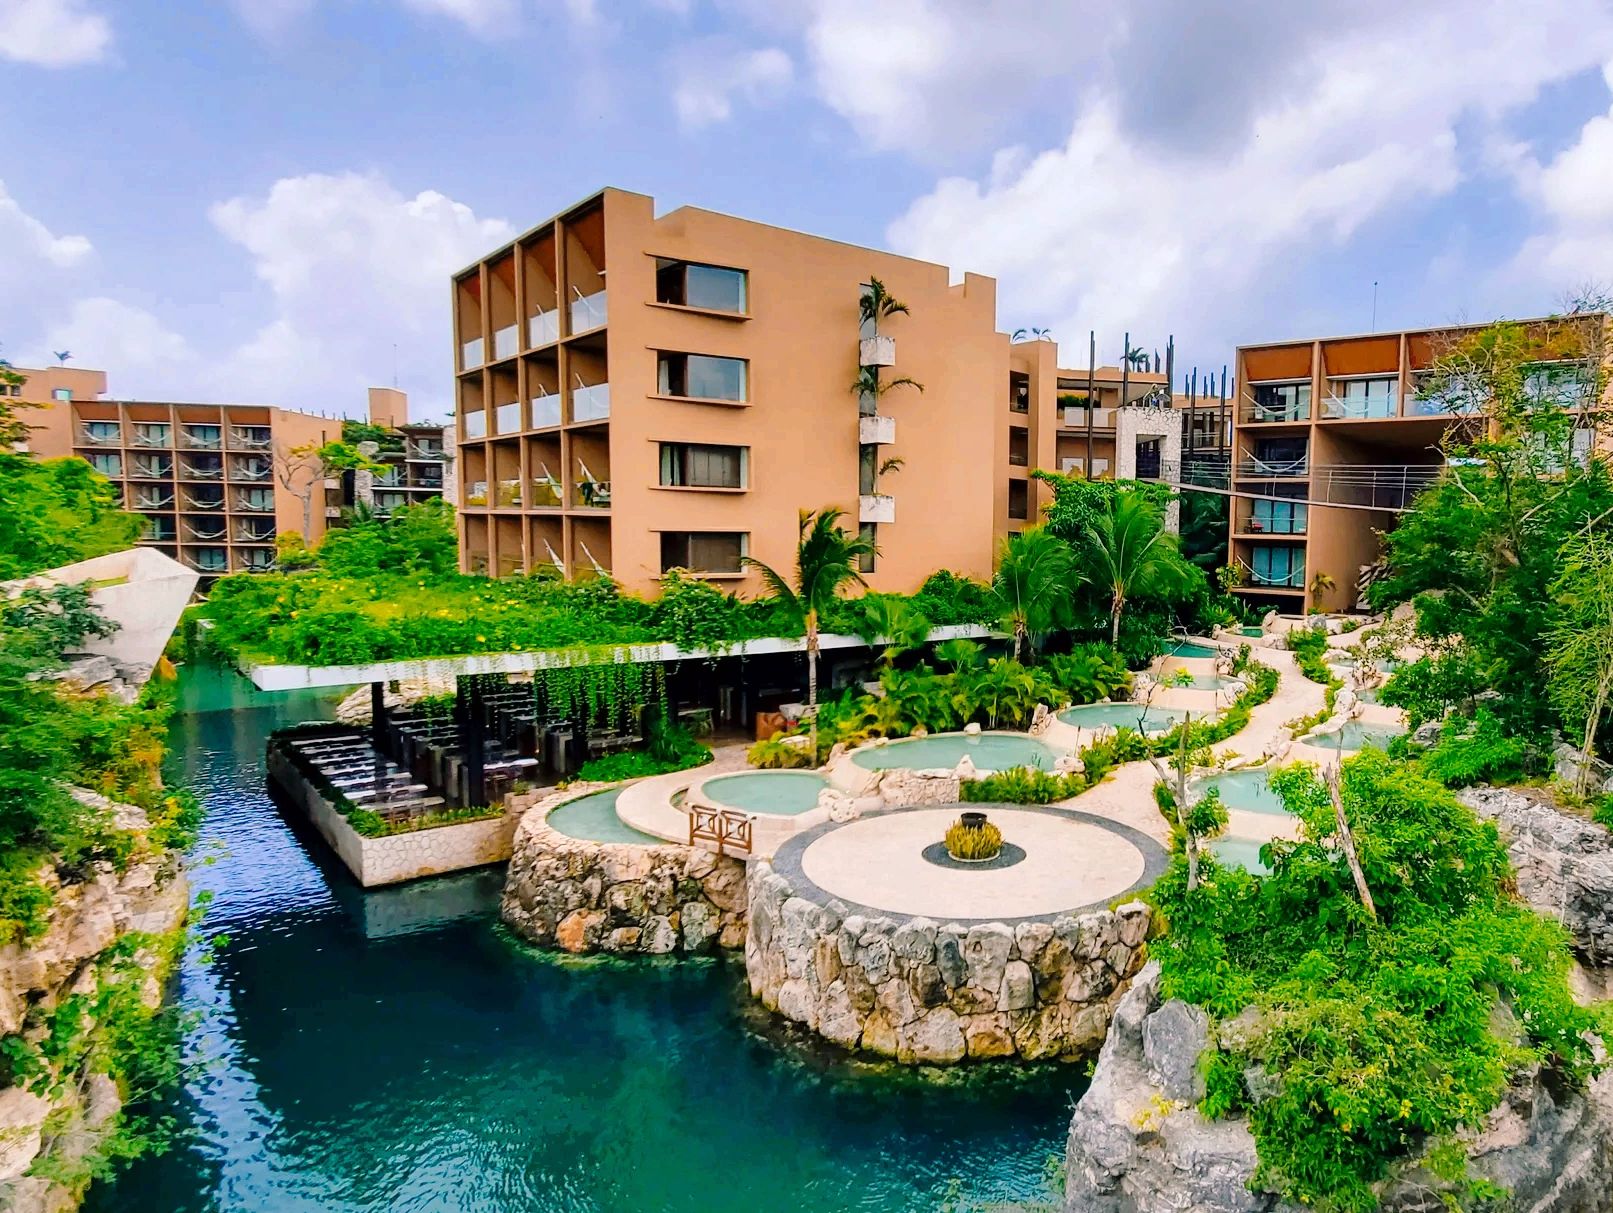 A small section of Hotel Xcaret with a large orange building sitting next to multiple water features